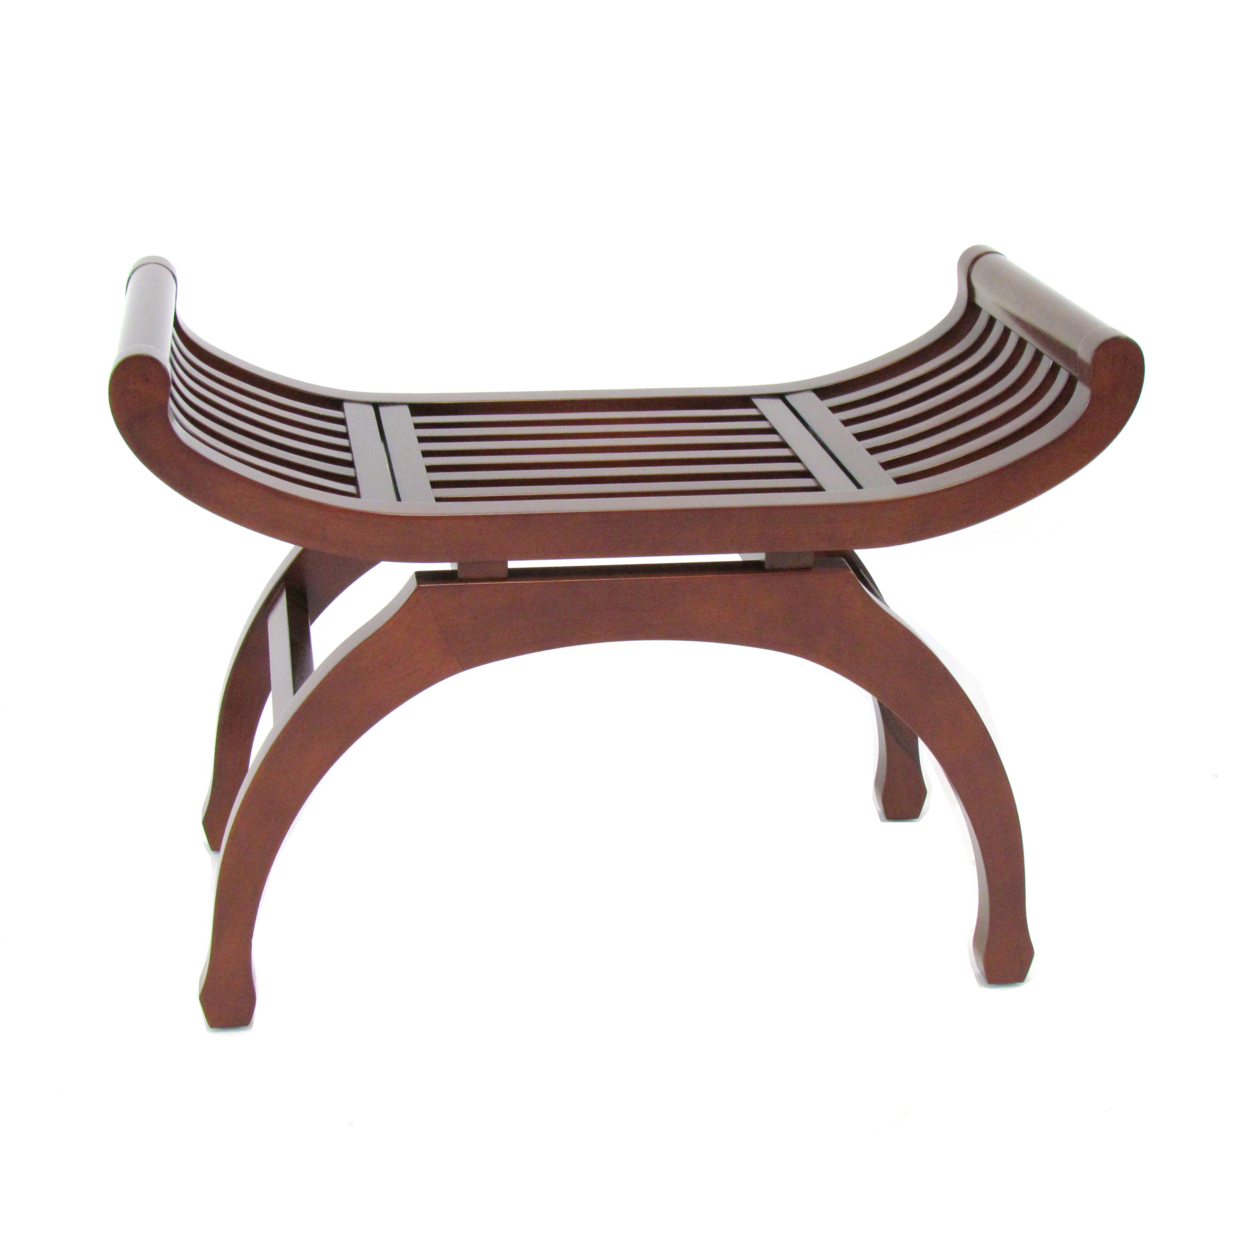 Curved Design Mission Style Stool With Slatted Seating, Brown- Saltoro Sherpi